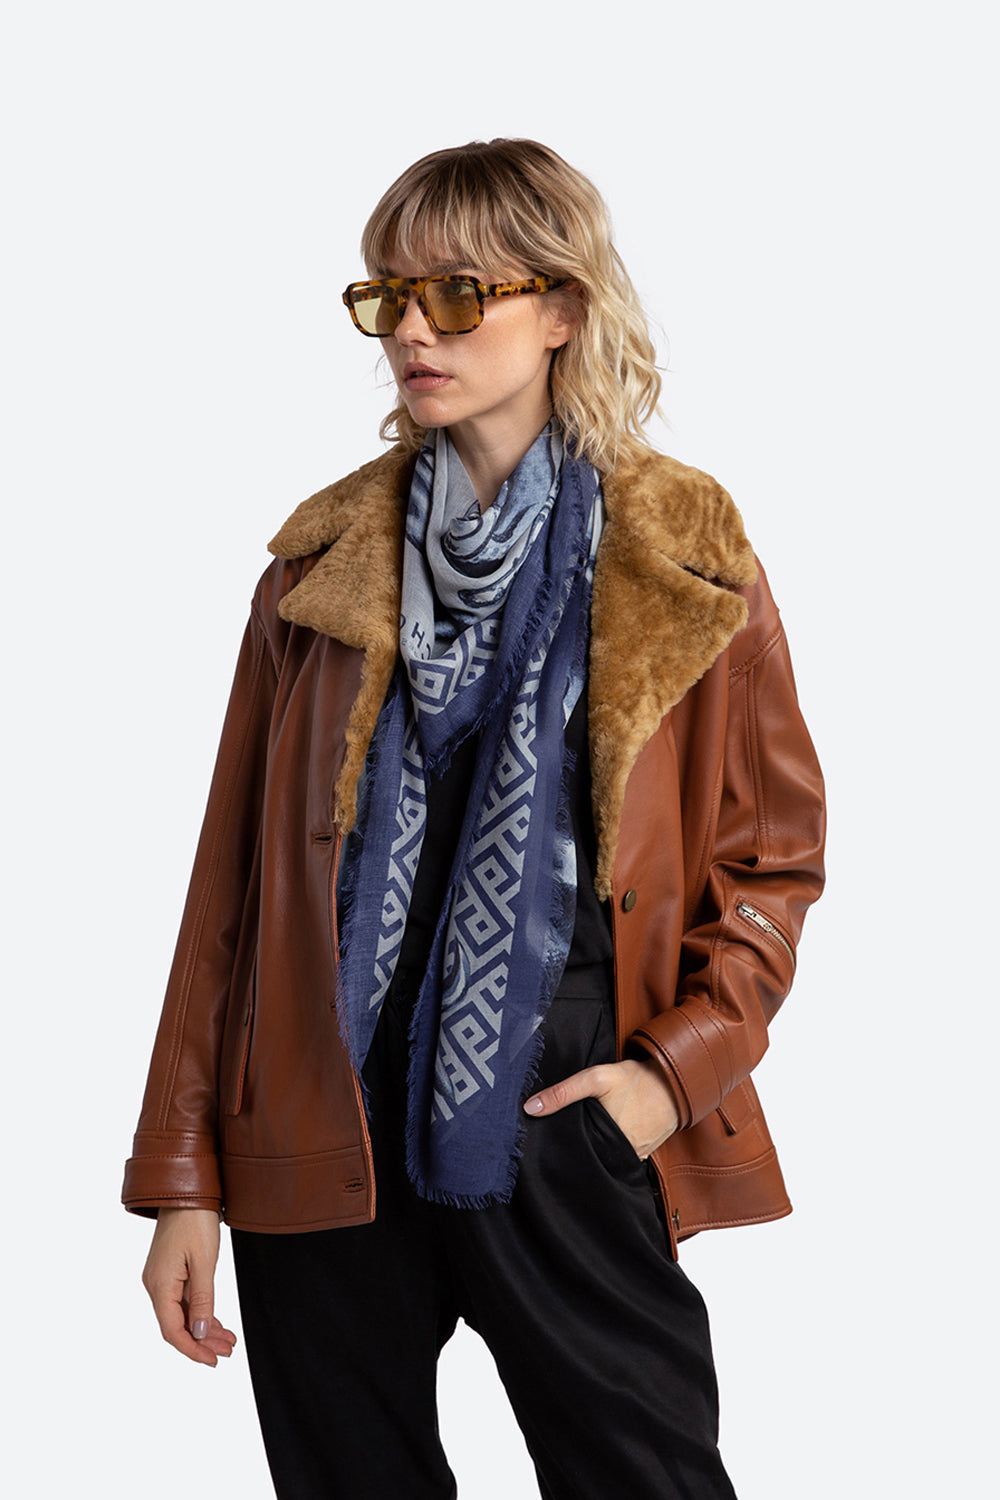 Woman models the Lavalle Shearling Collar Jacket in Cognac